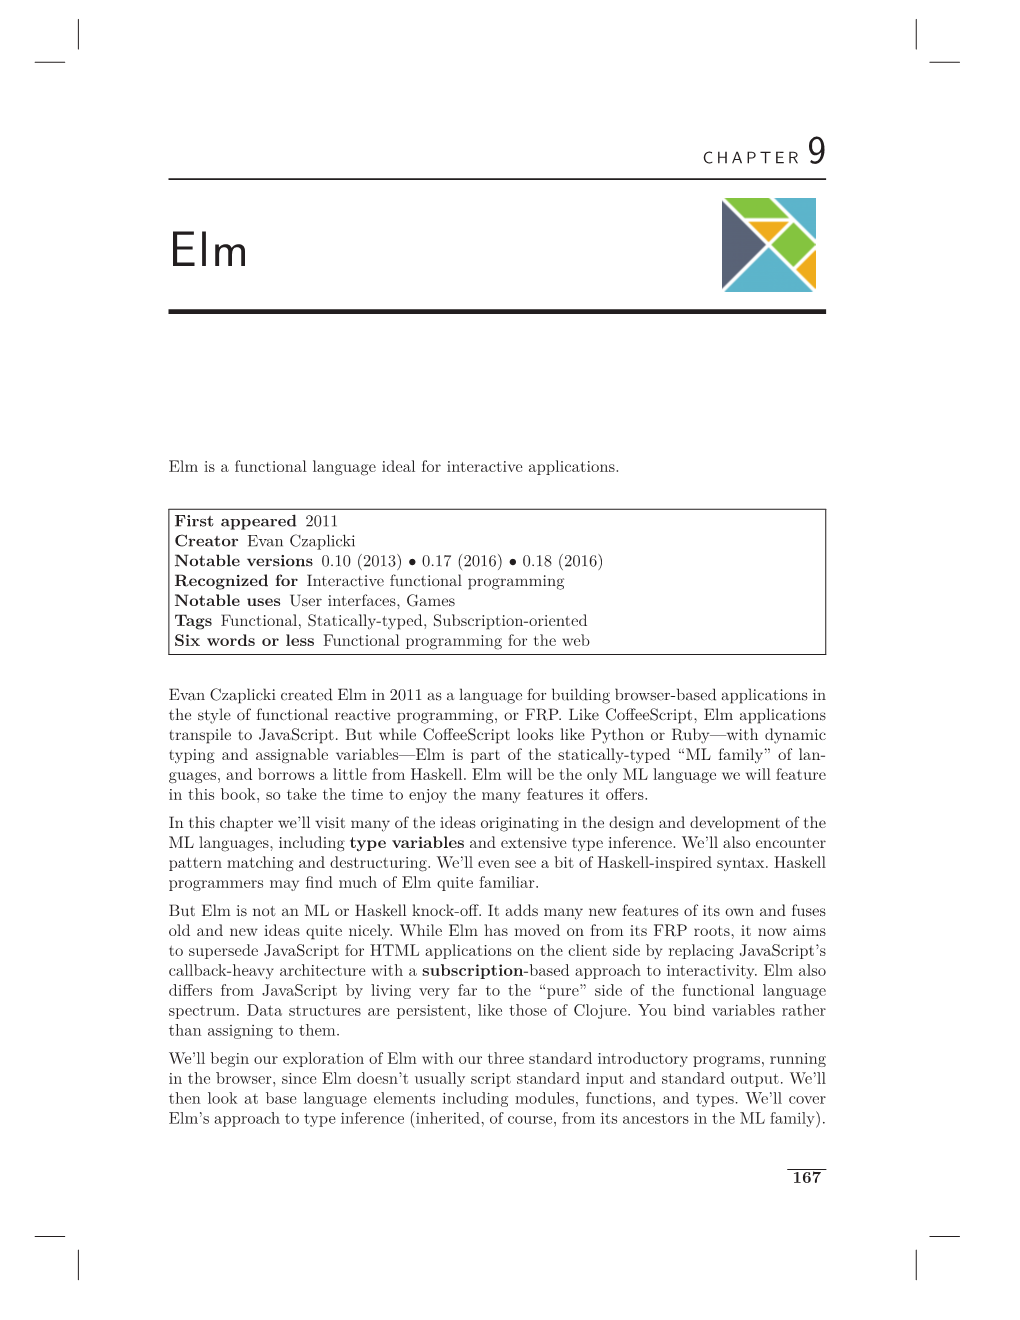 CHAPTER 9 Elm Is a Functional Language Ideal For